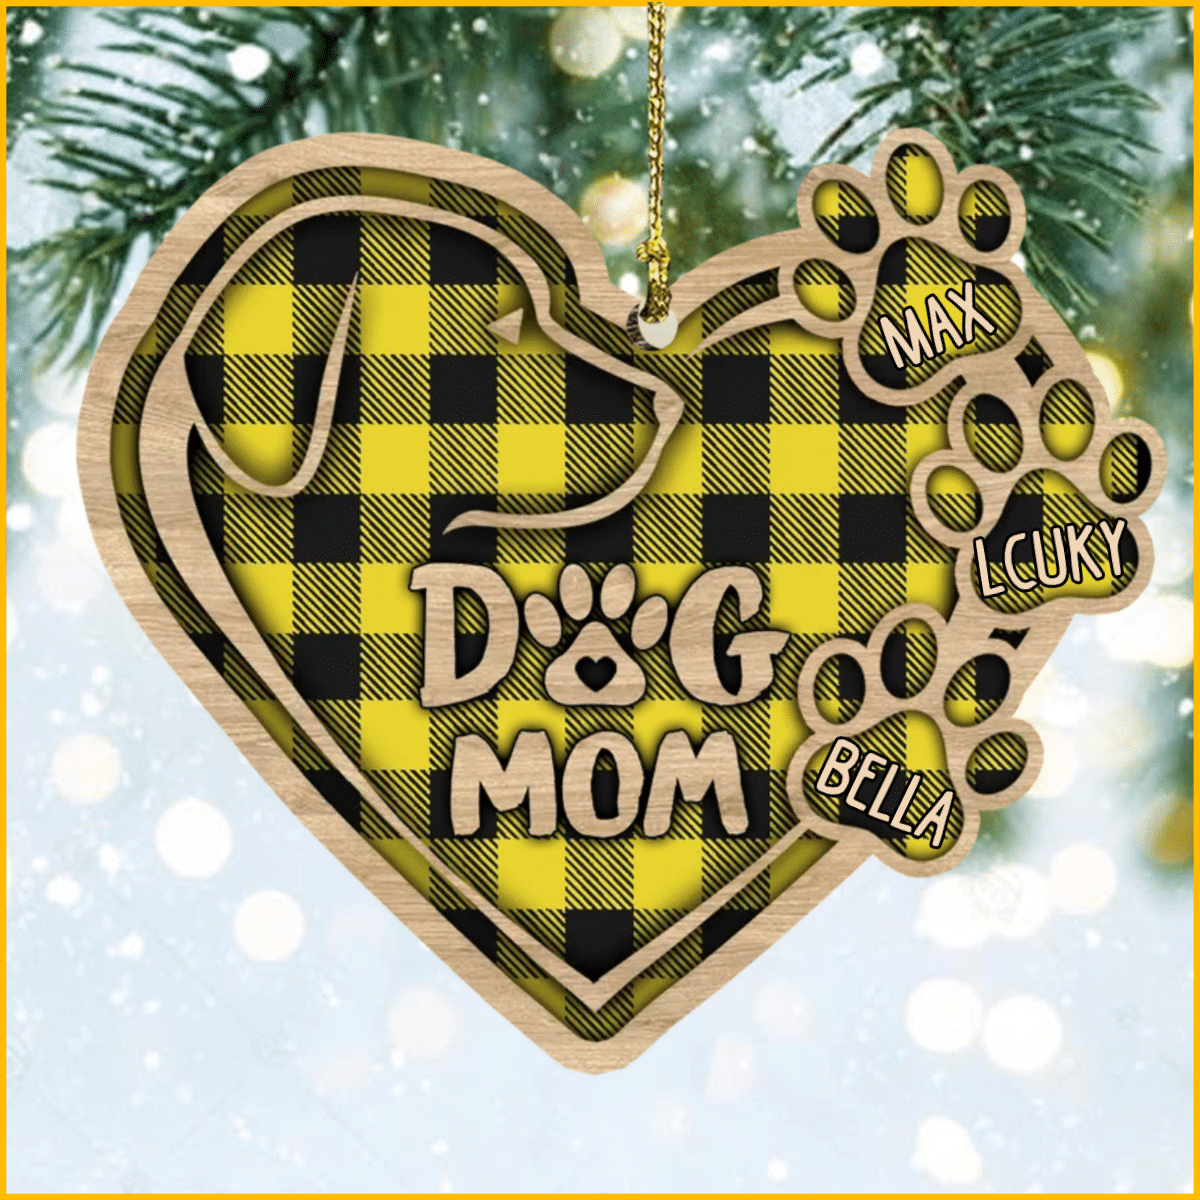 Christmas Dog Mom Heart Plaid Pattern Wood Ornament for Dog Mom Gifts